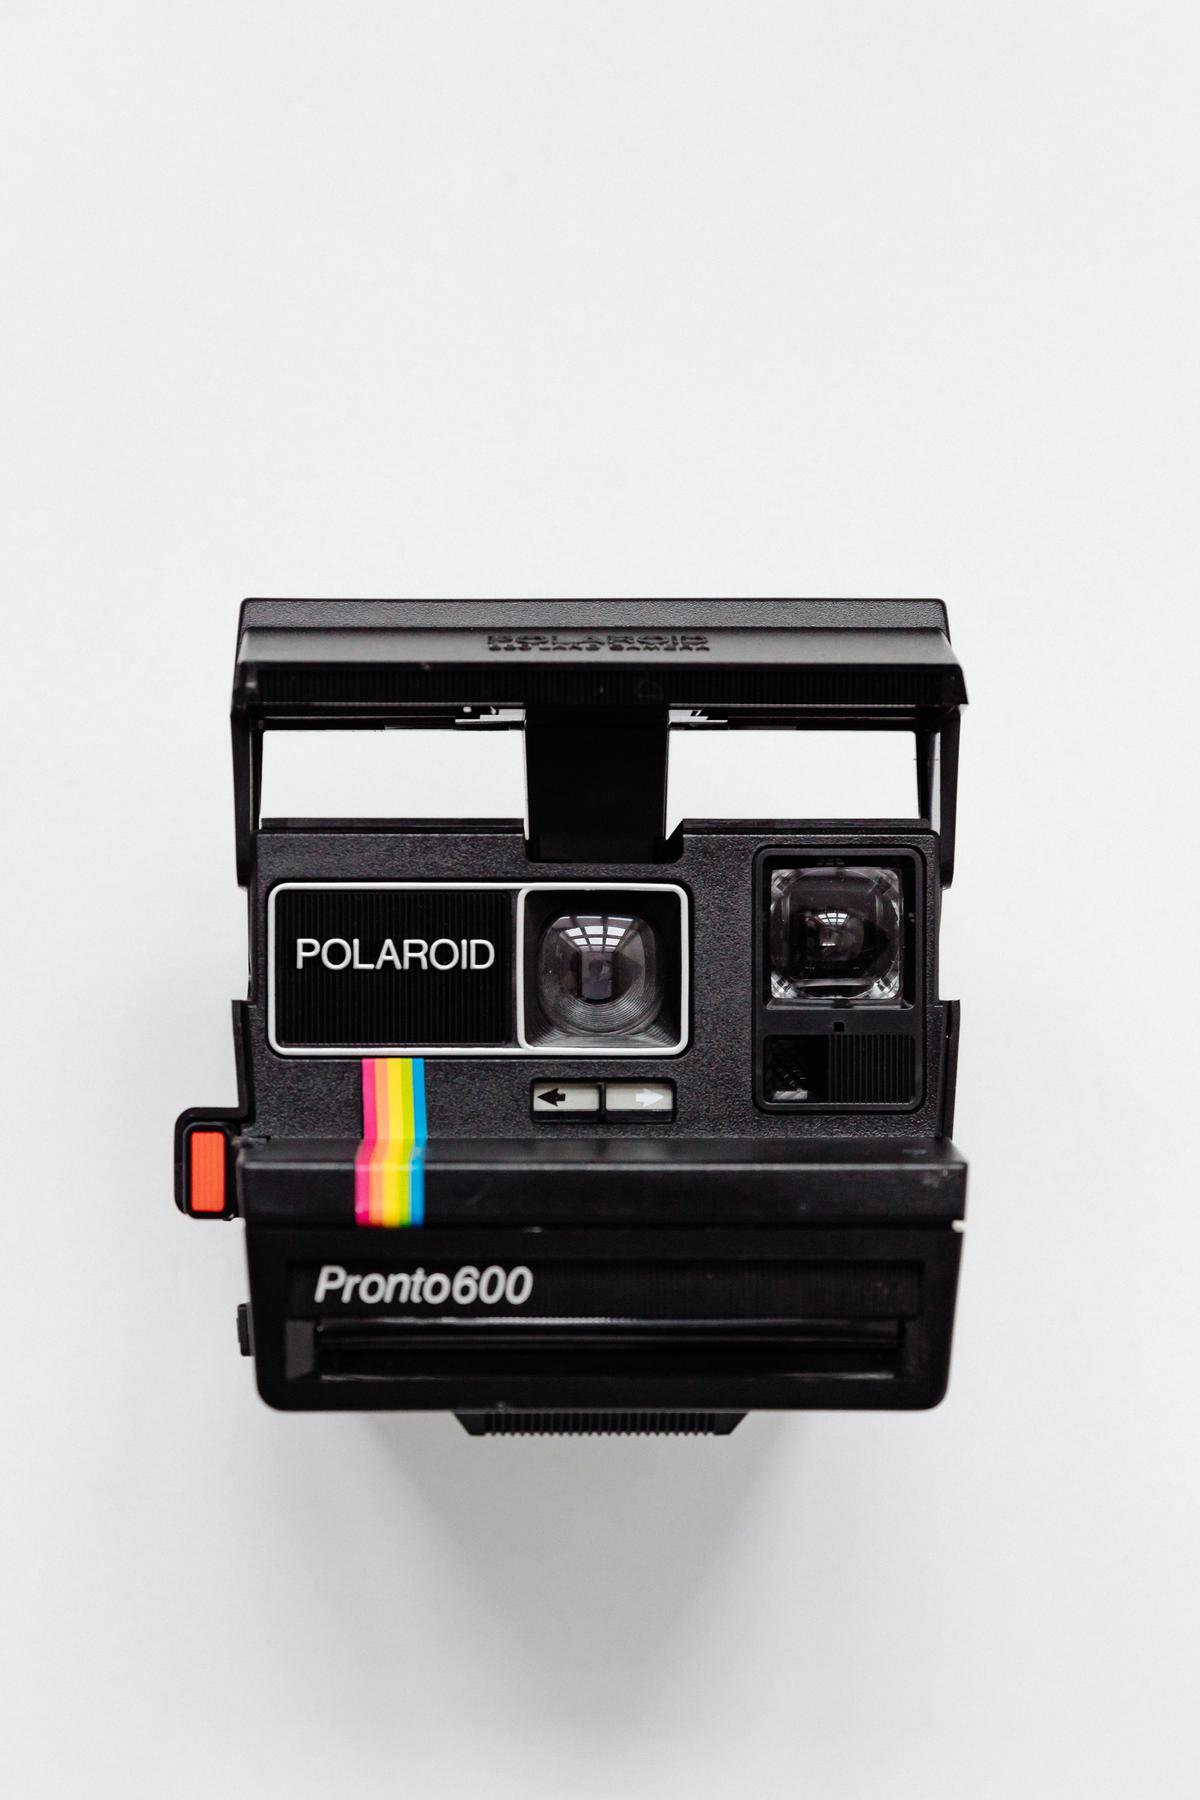 Image of a vintage Polaroid camera with its unique design and retro appeal.